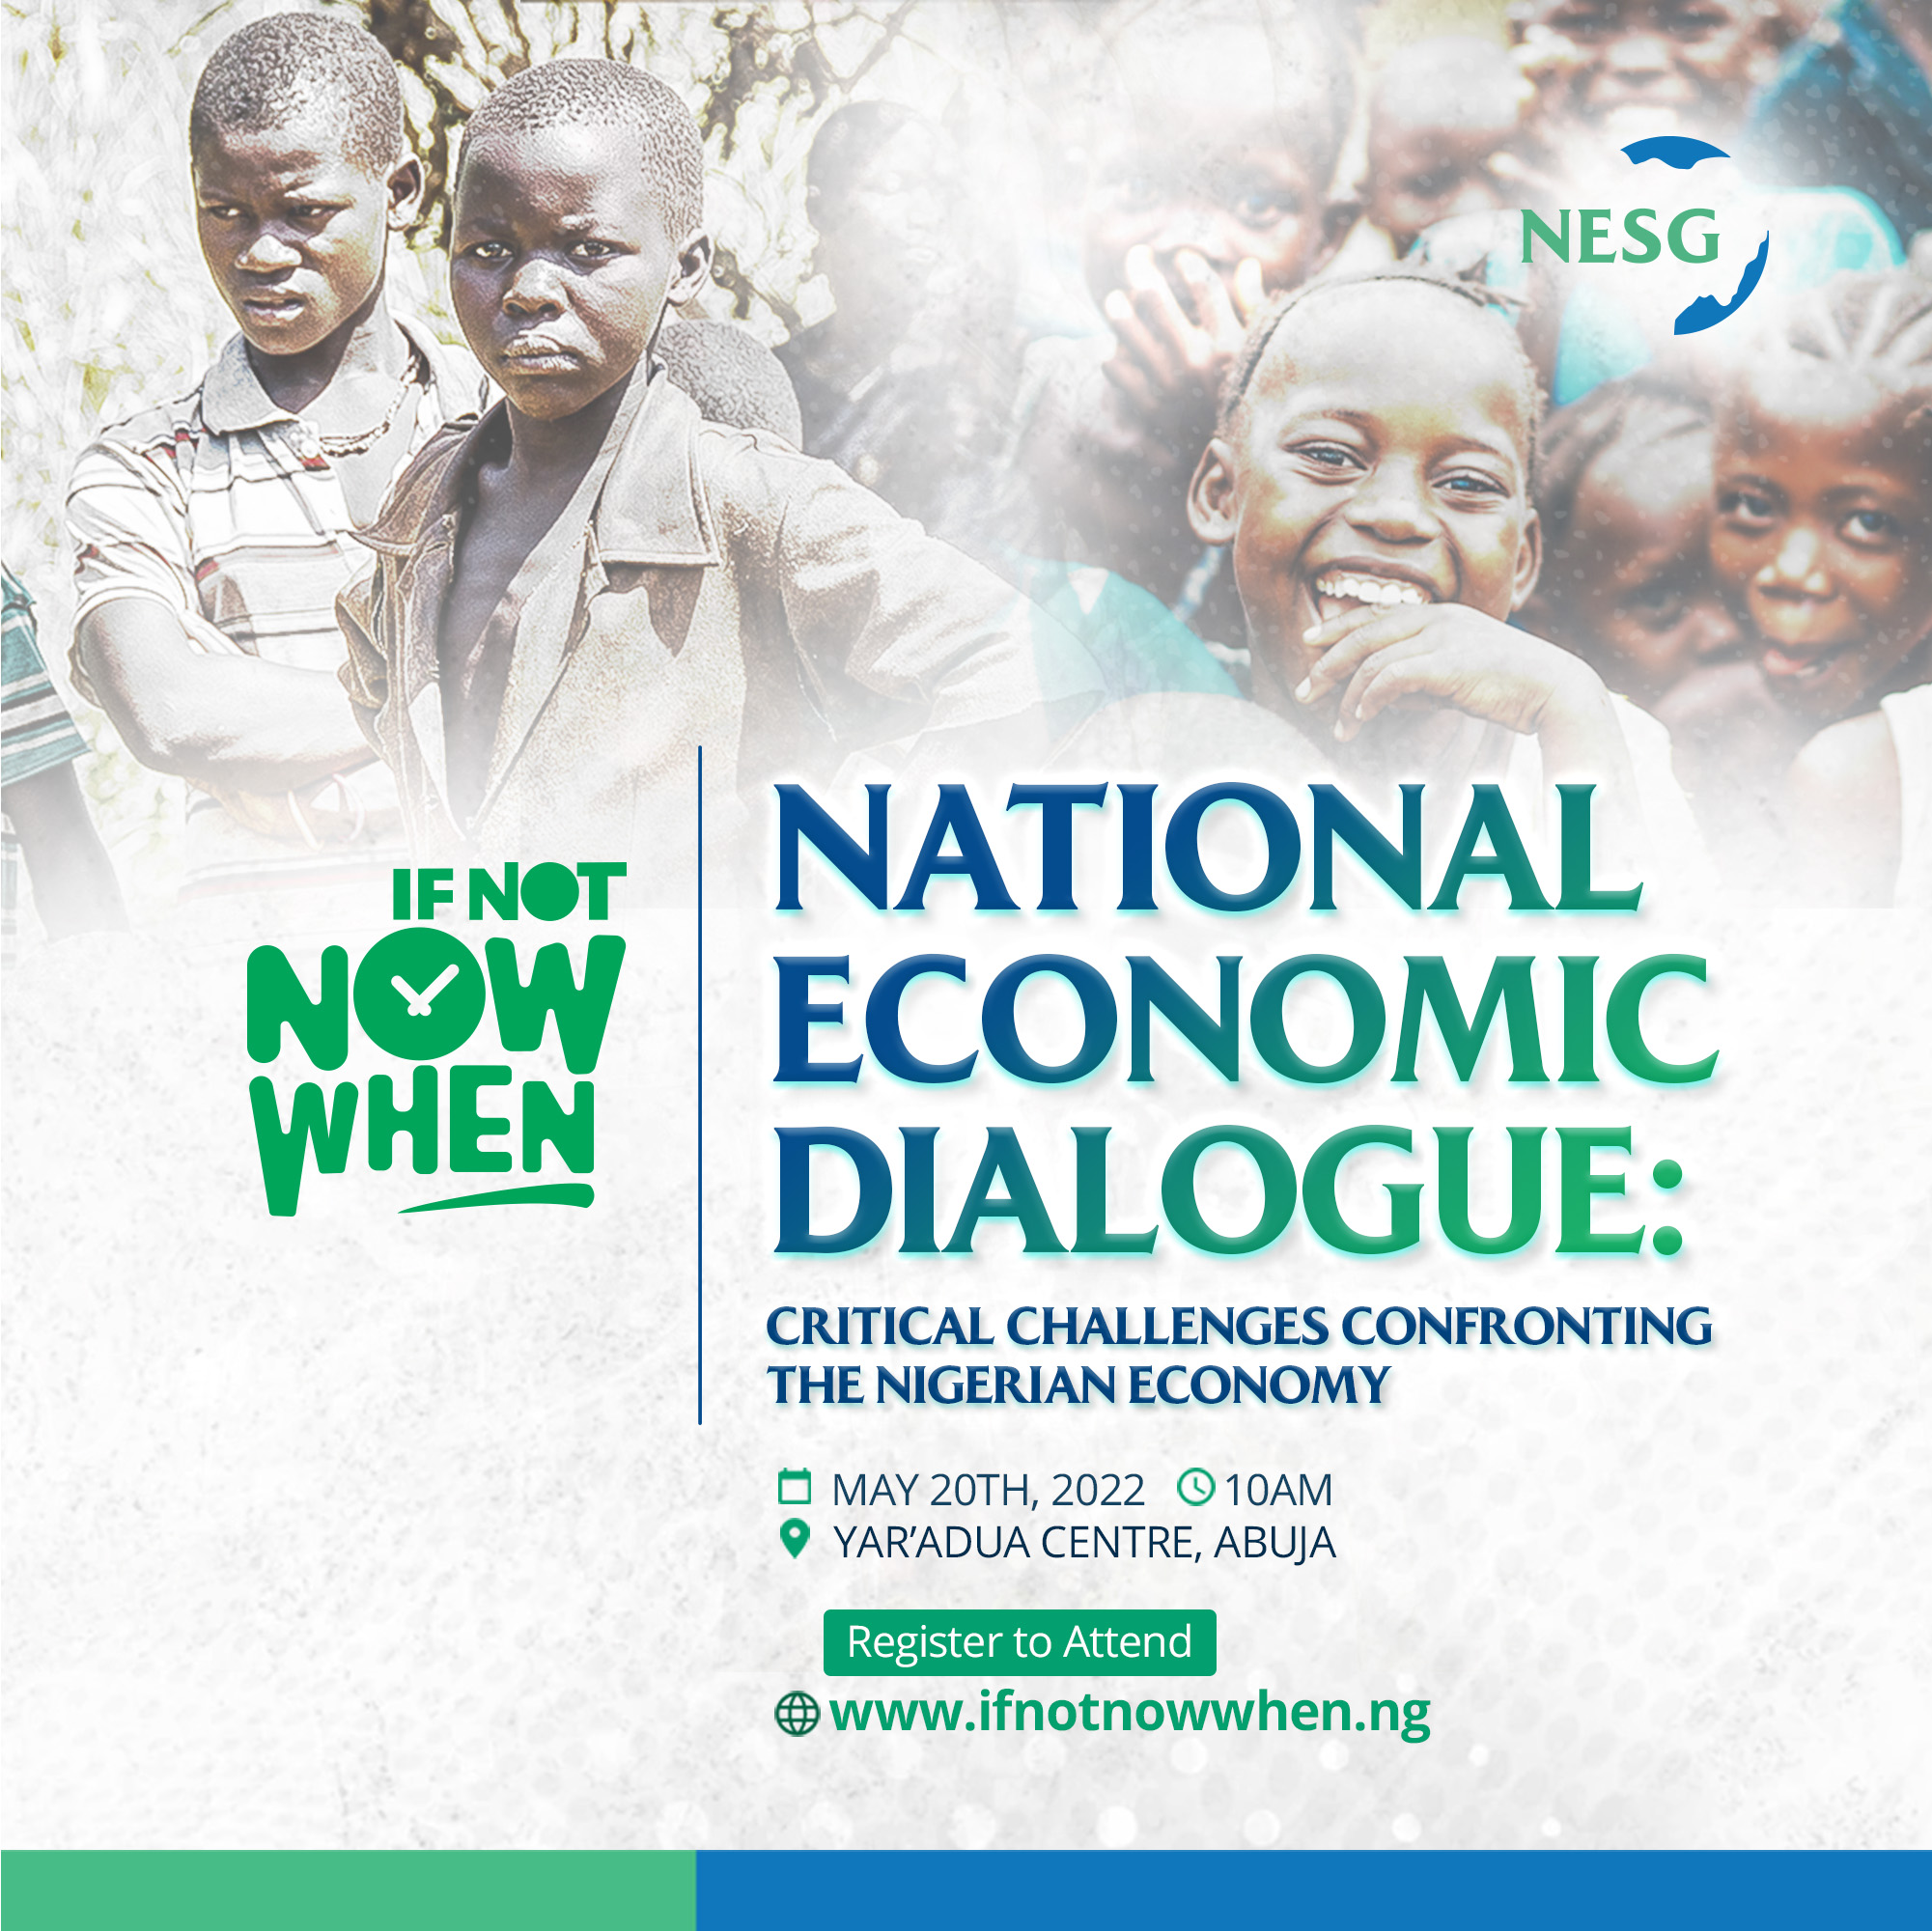 NESG to hold National Economic Dialogue to confront the Critical Challenges Confronting the Nigerian Economy,The Nigerian Economic Summit Group, The NESG, think-tank, think, tank, nigeria, policy, nesg, africa, number one think in africa, best think in nigeria, the best think tank in africa, top 10 think tanks in nigeria, think tank nigeria, economy, business, PPD, public, private, dialogue, Nigeria, Nigeria PPD, NIGERIA, PPD, The Nigerian Economic Summit Group